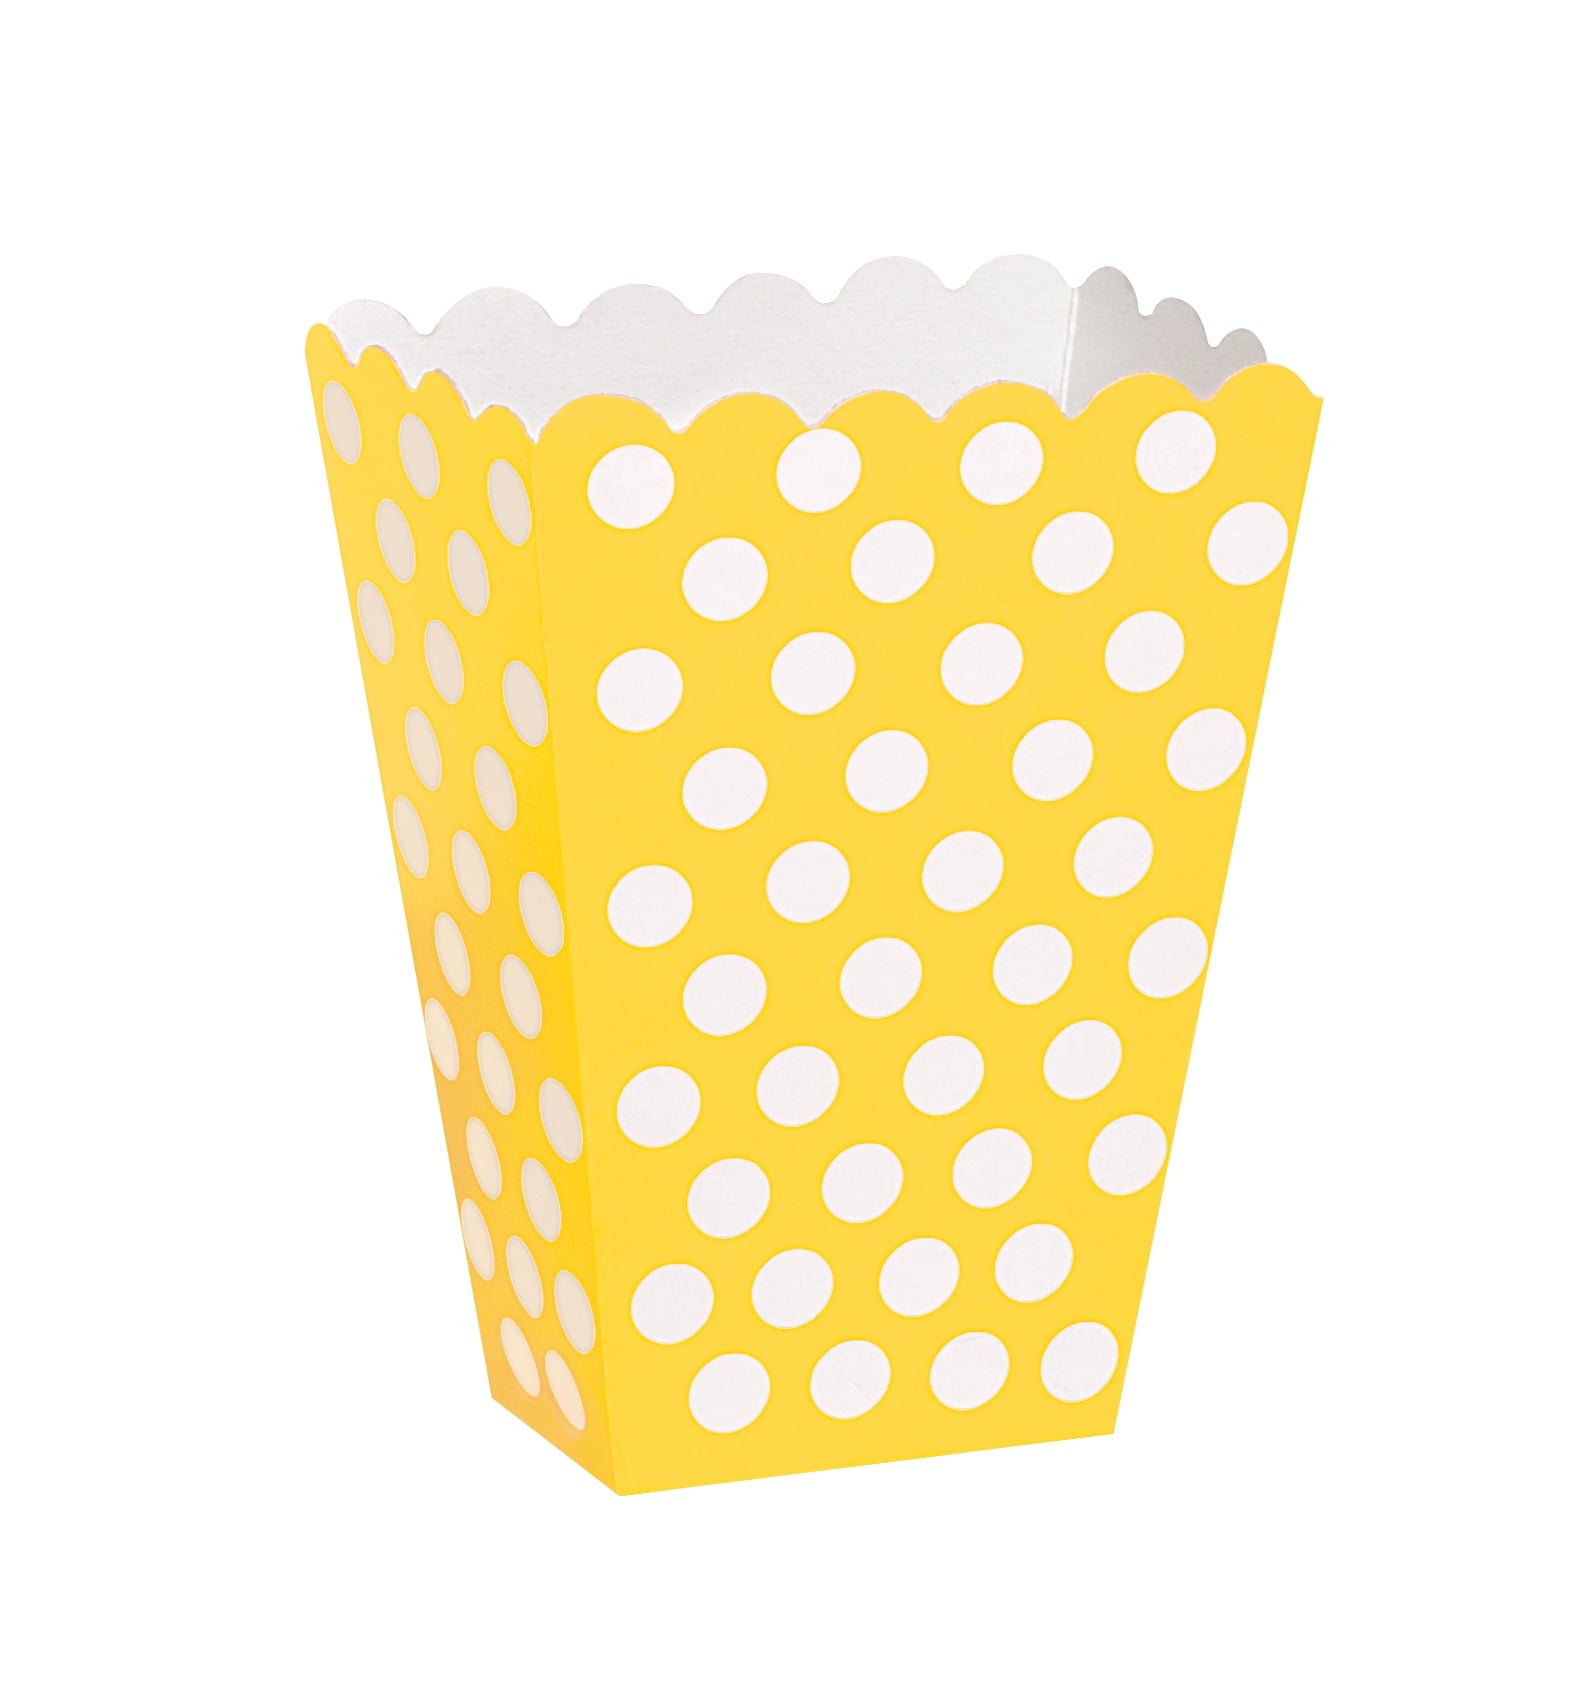 5 Cinema Solid Sunshine YELLOW Treat Party Small Candy Favour Popcorn Boxes 